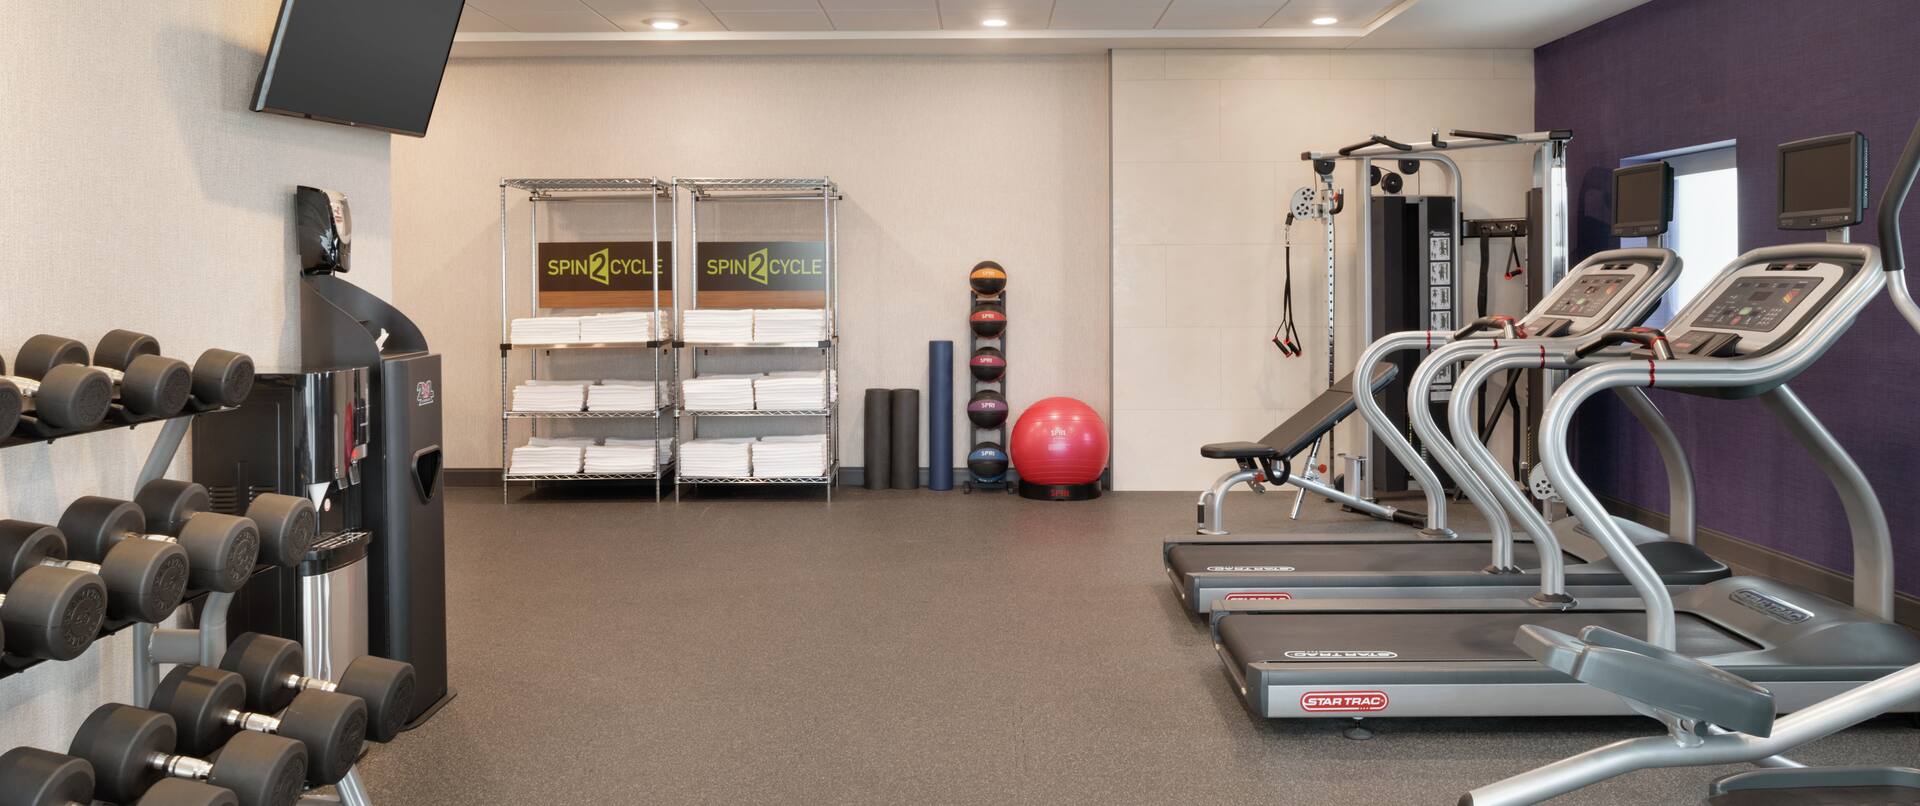 Spacious fitness center featuring cardio machines, free weights, TV, and complimentary towels.